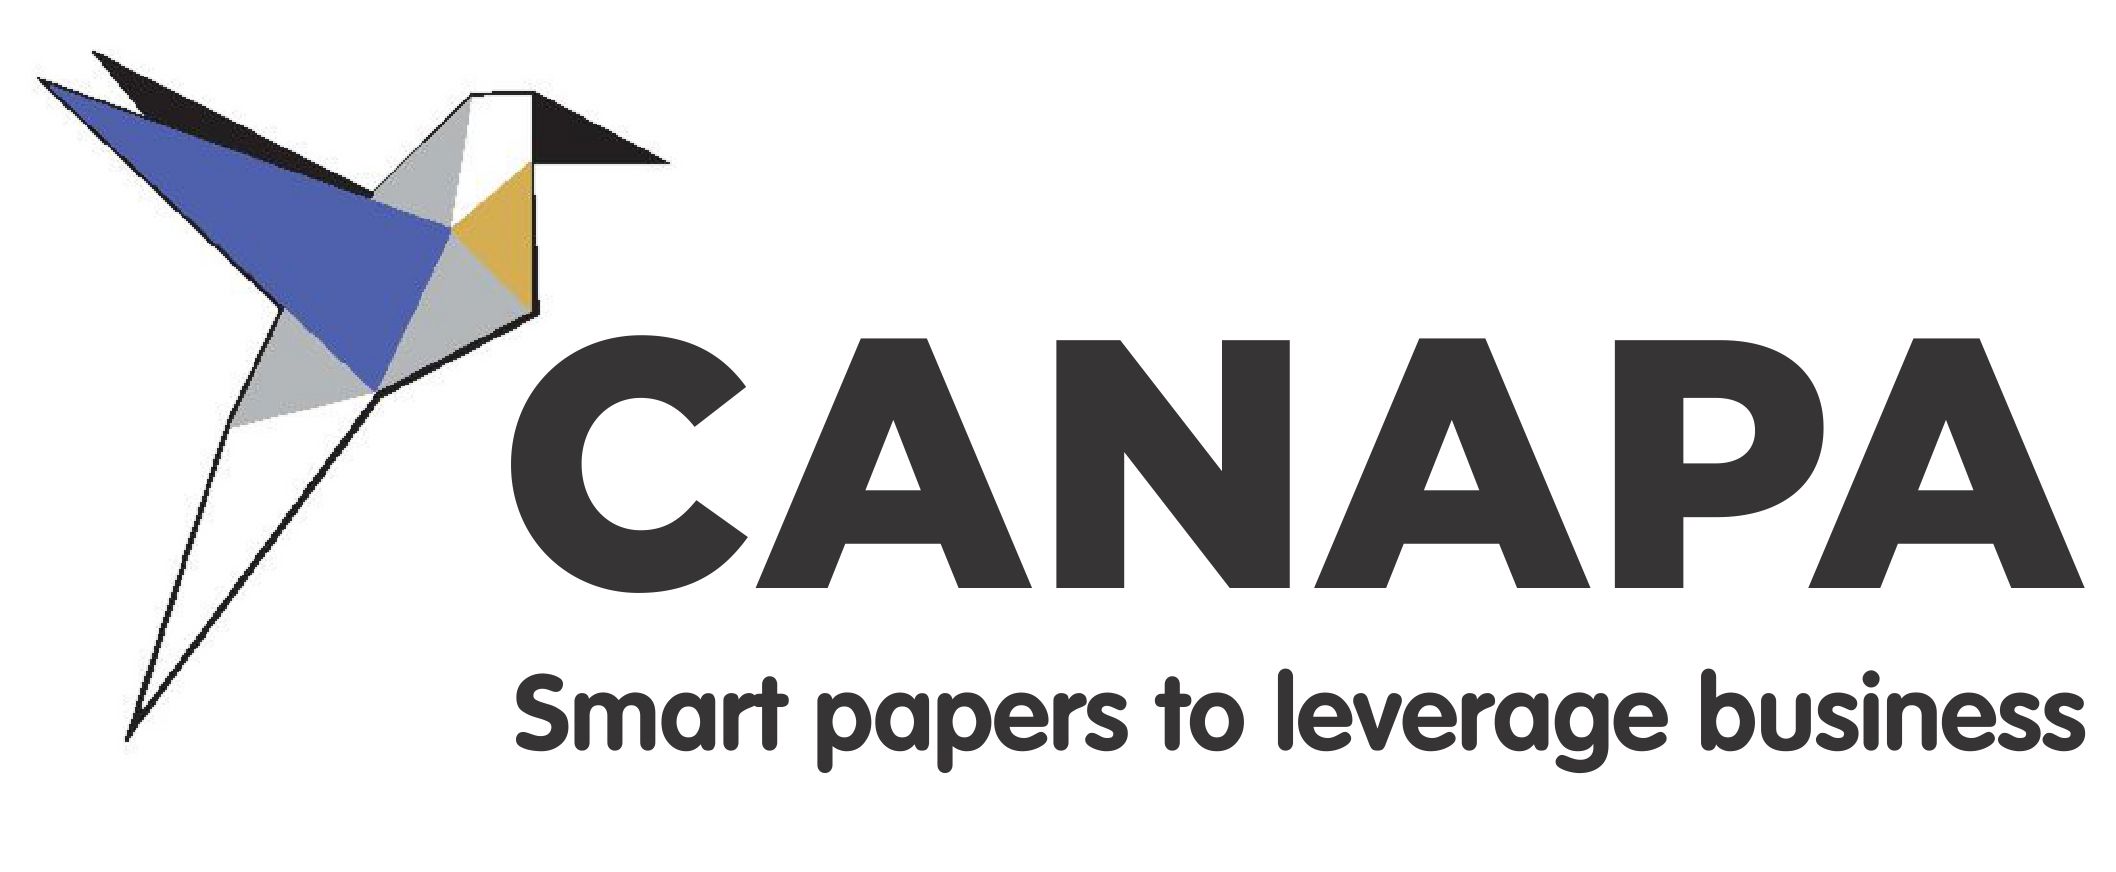 CANAPA Paper Technologies will exhibit at FESPA 2019 with its smart sublimation papers